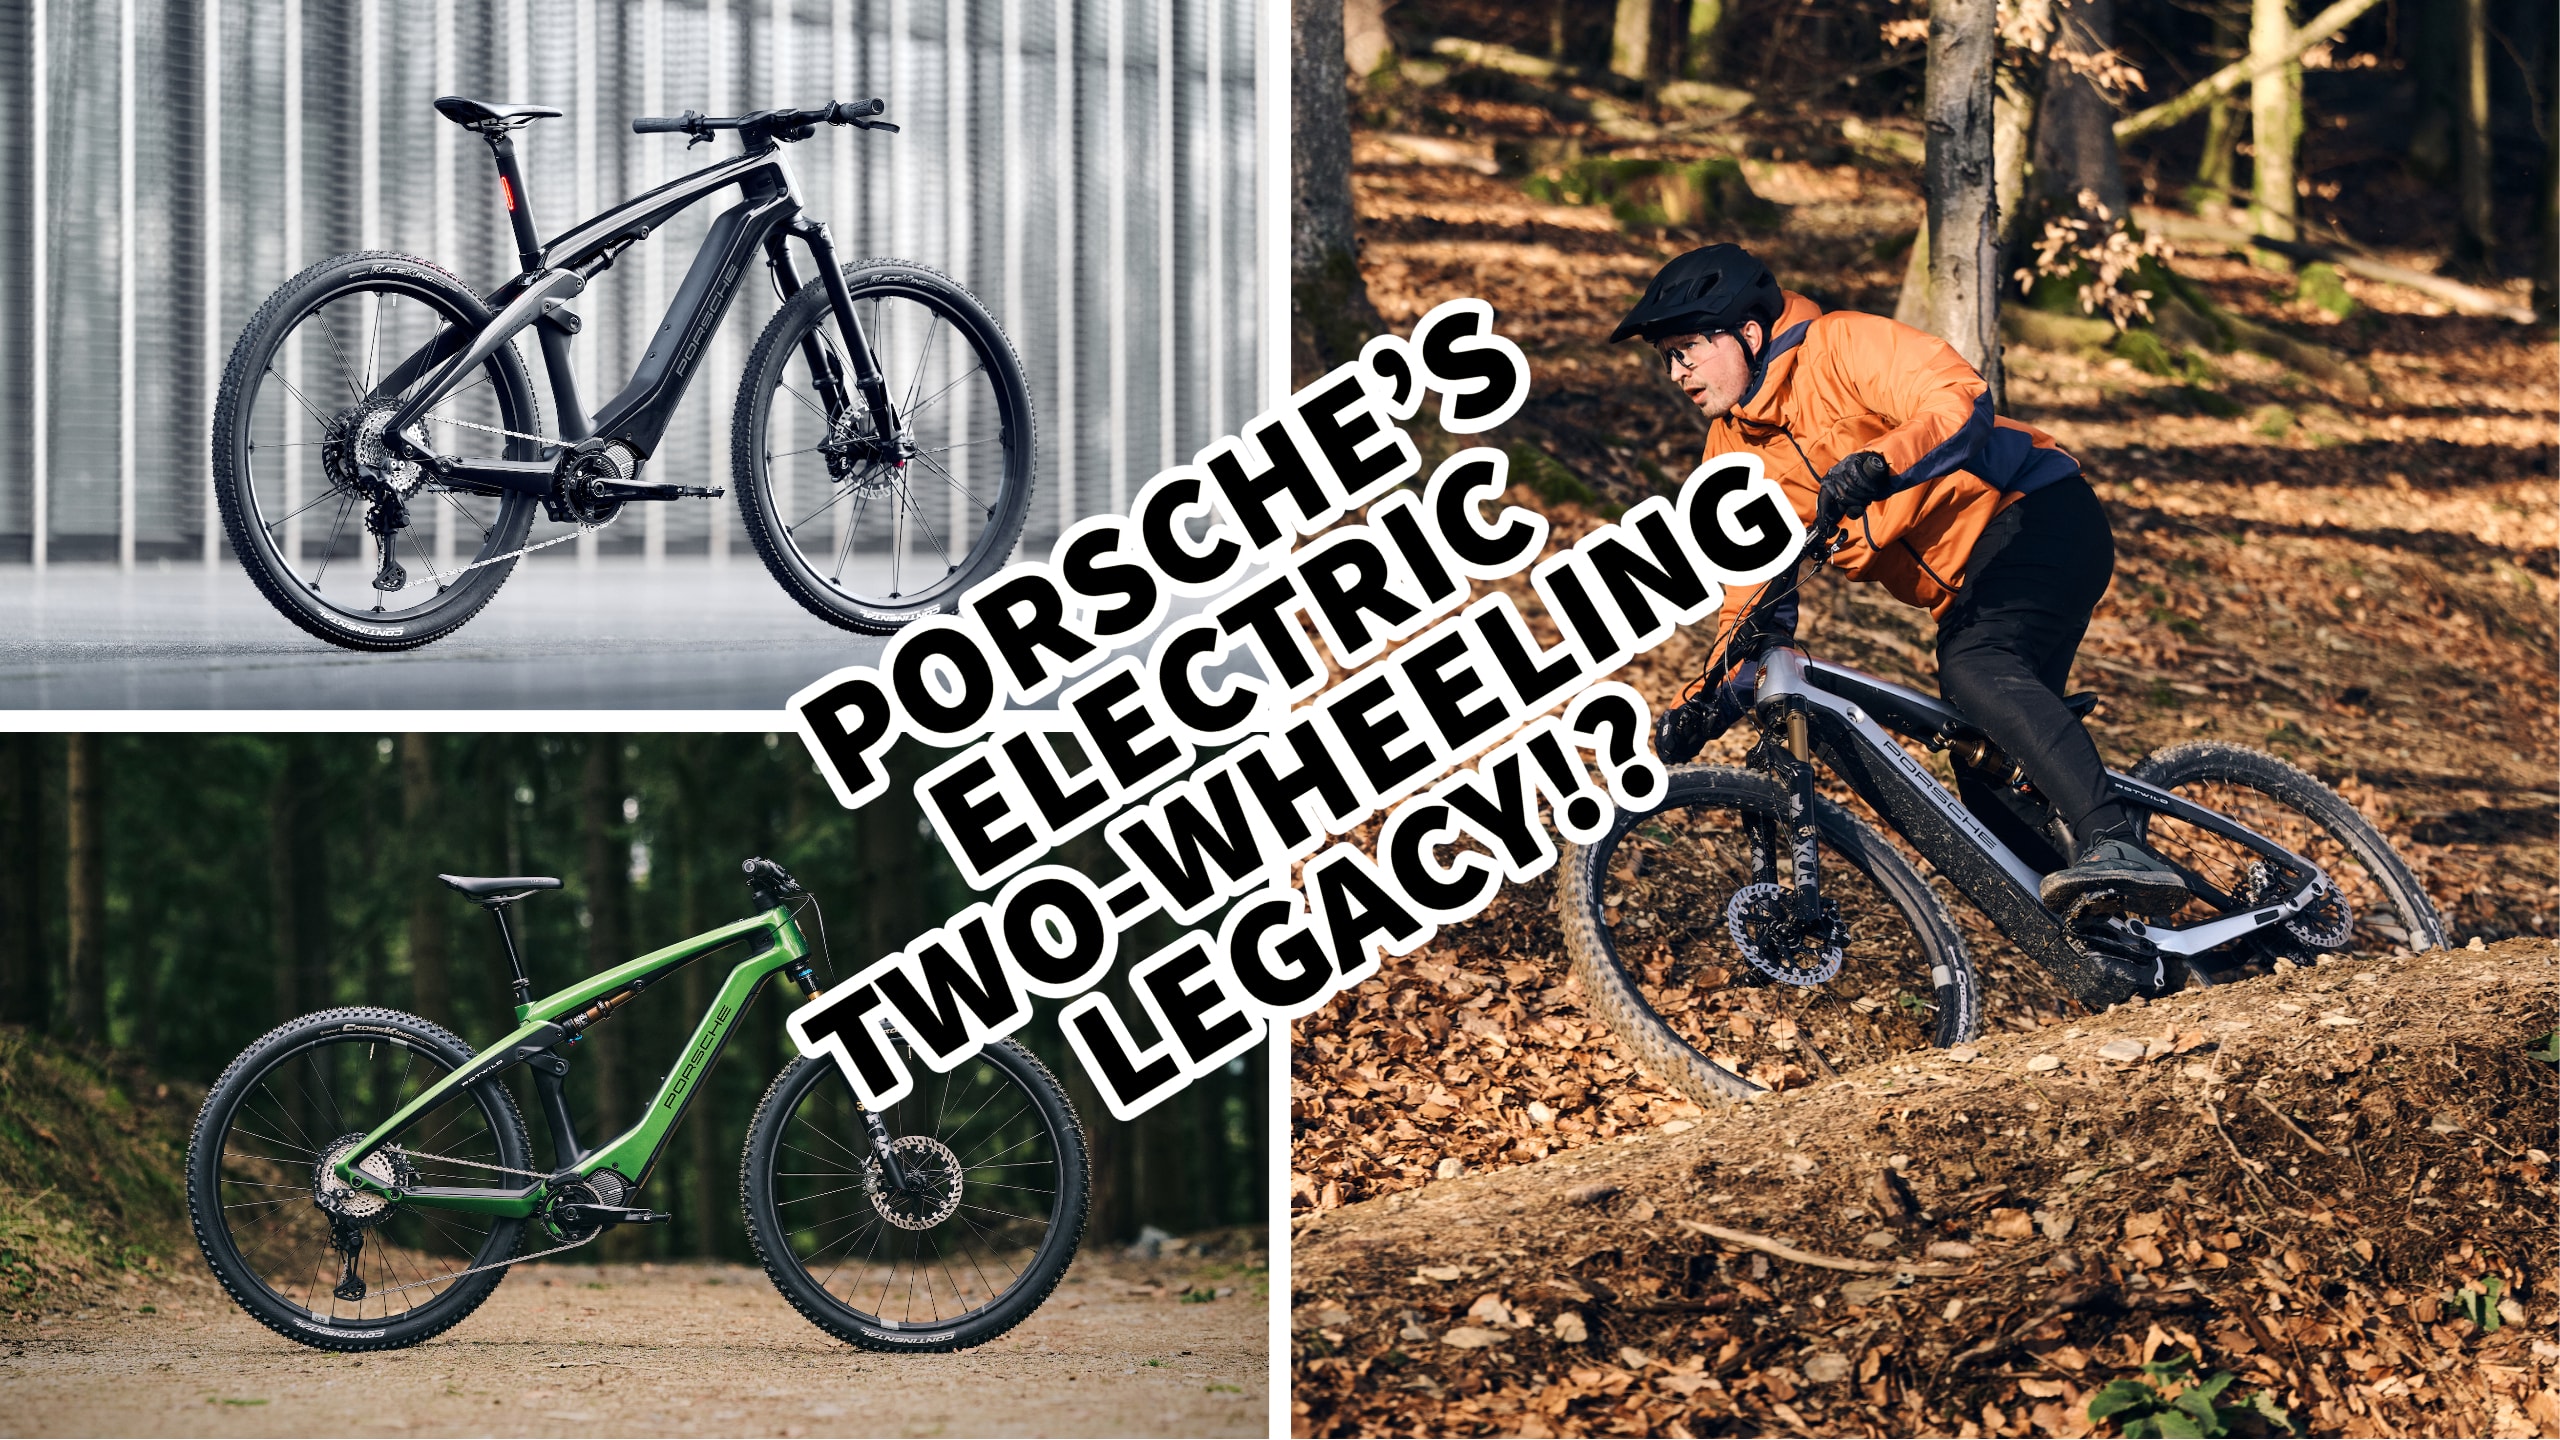 Porsche Continues 75 Years of Legacy With Two New Electrified MTBs Built for Domination